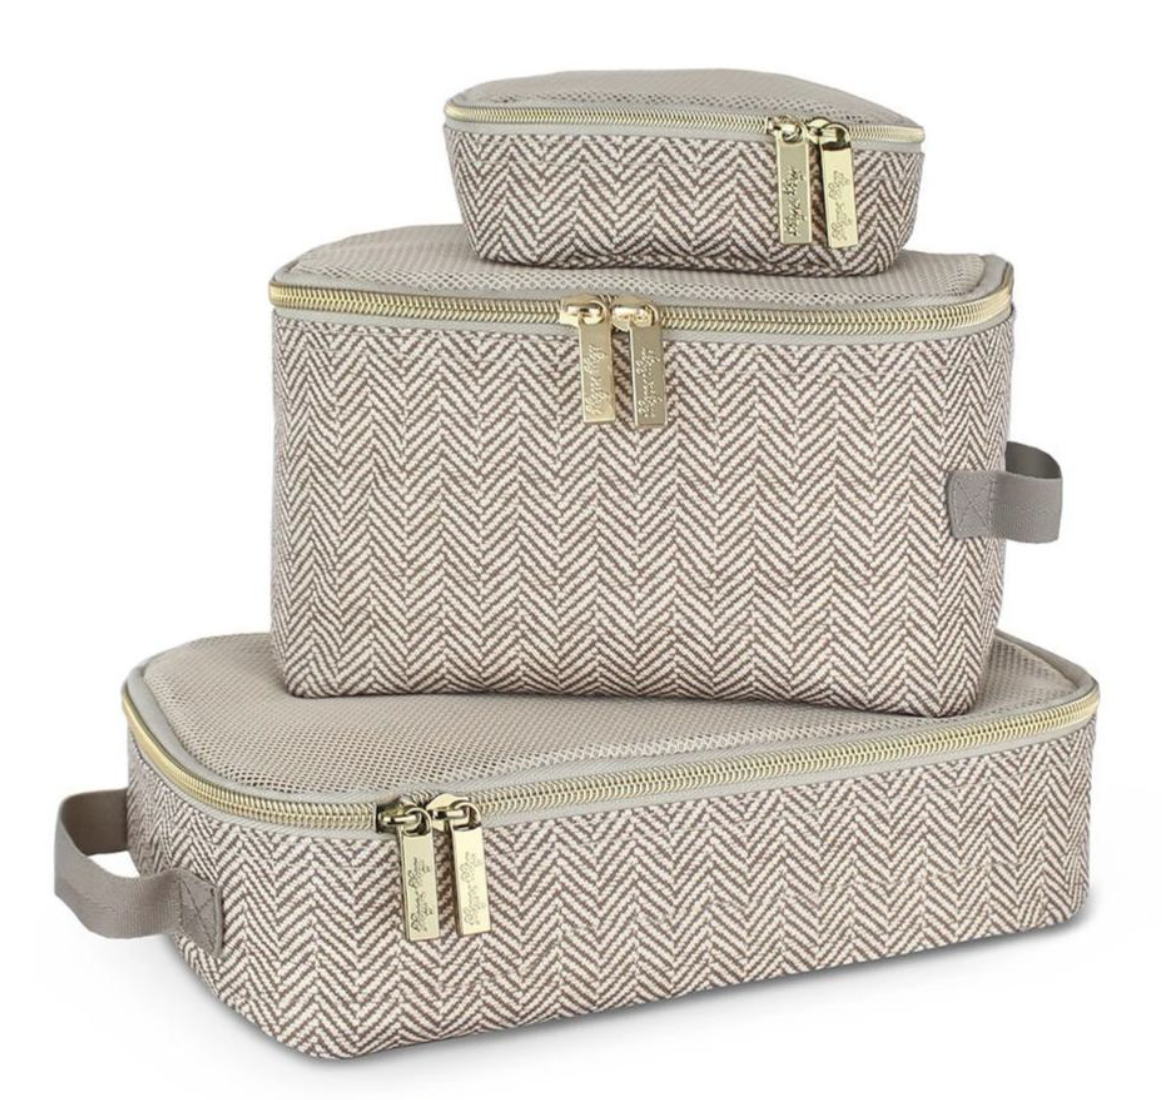 Taupe Pack Like a Boss Diaper Bag Packing Cubes